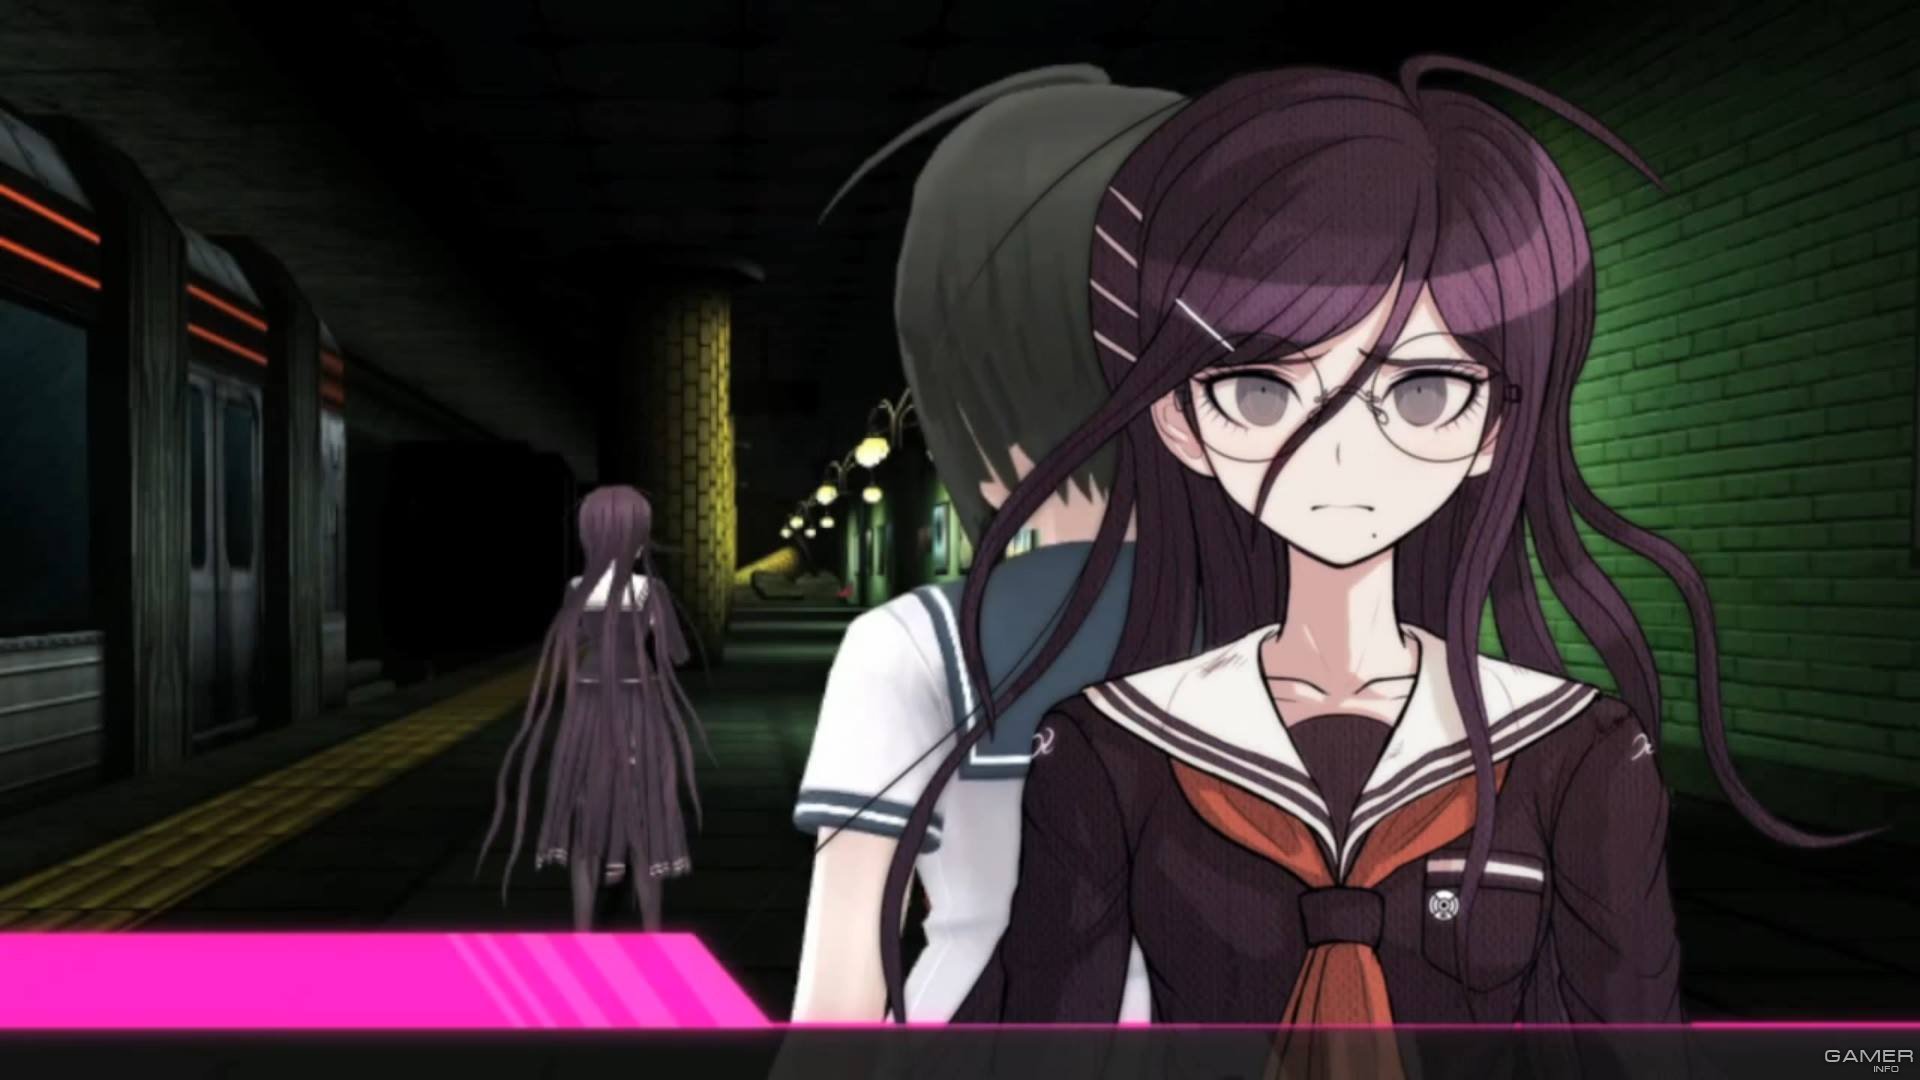 Danganronpa another another despair. Данганронпа another Episode. Danganronpa another Episode: Ultra Despair girls игра. Данганронпа энозер эпизод. Danganronpa another Episode: Ultra Despair girls.